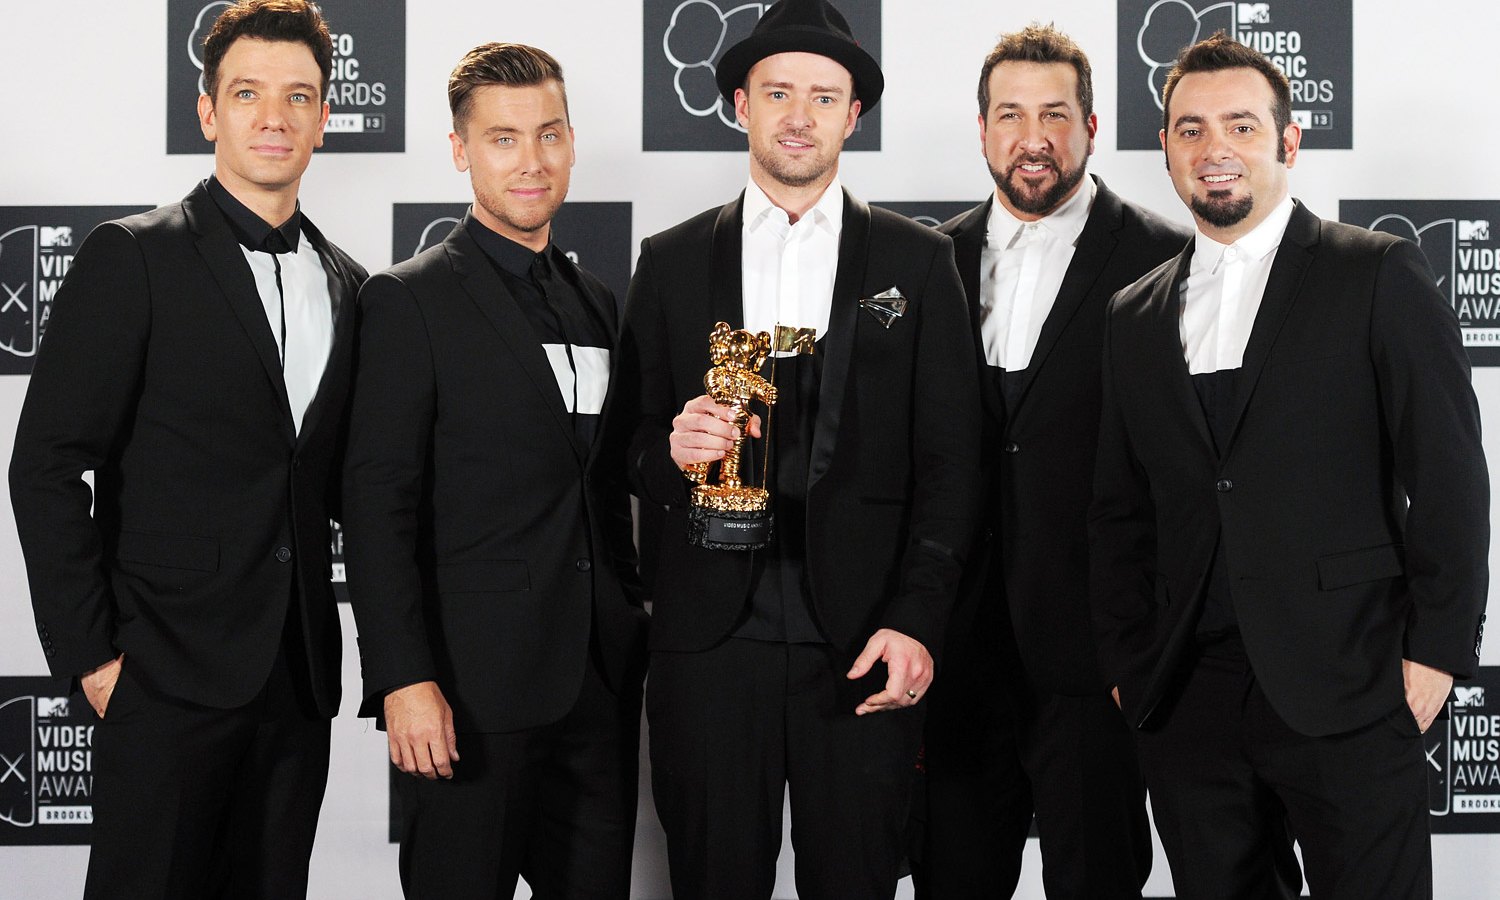 N'Sync attends the MTV Video Music Awards on August 25, 2013